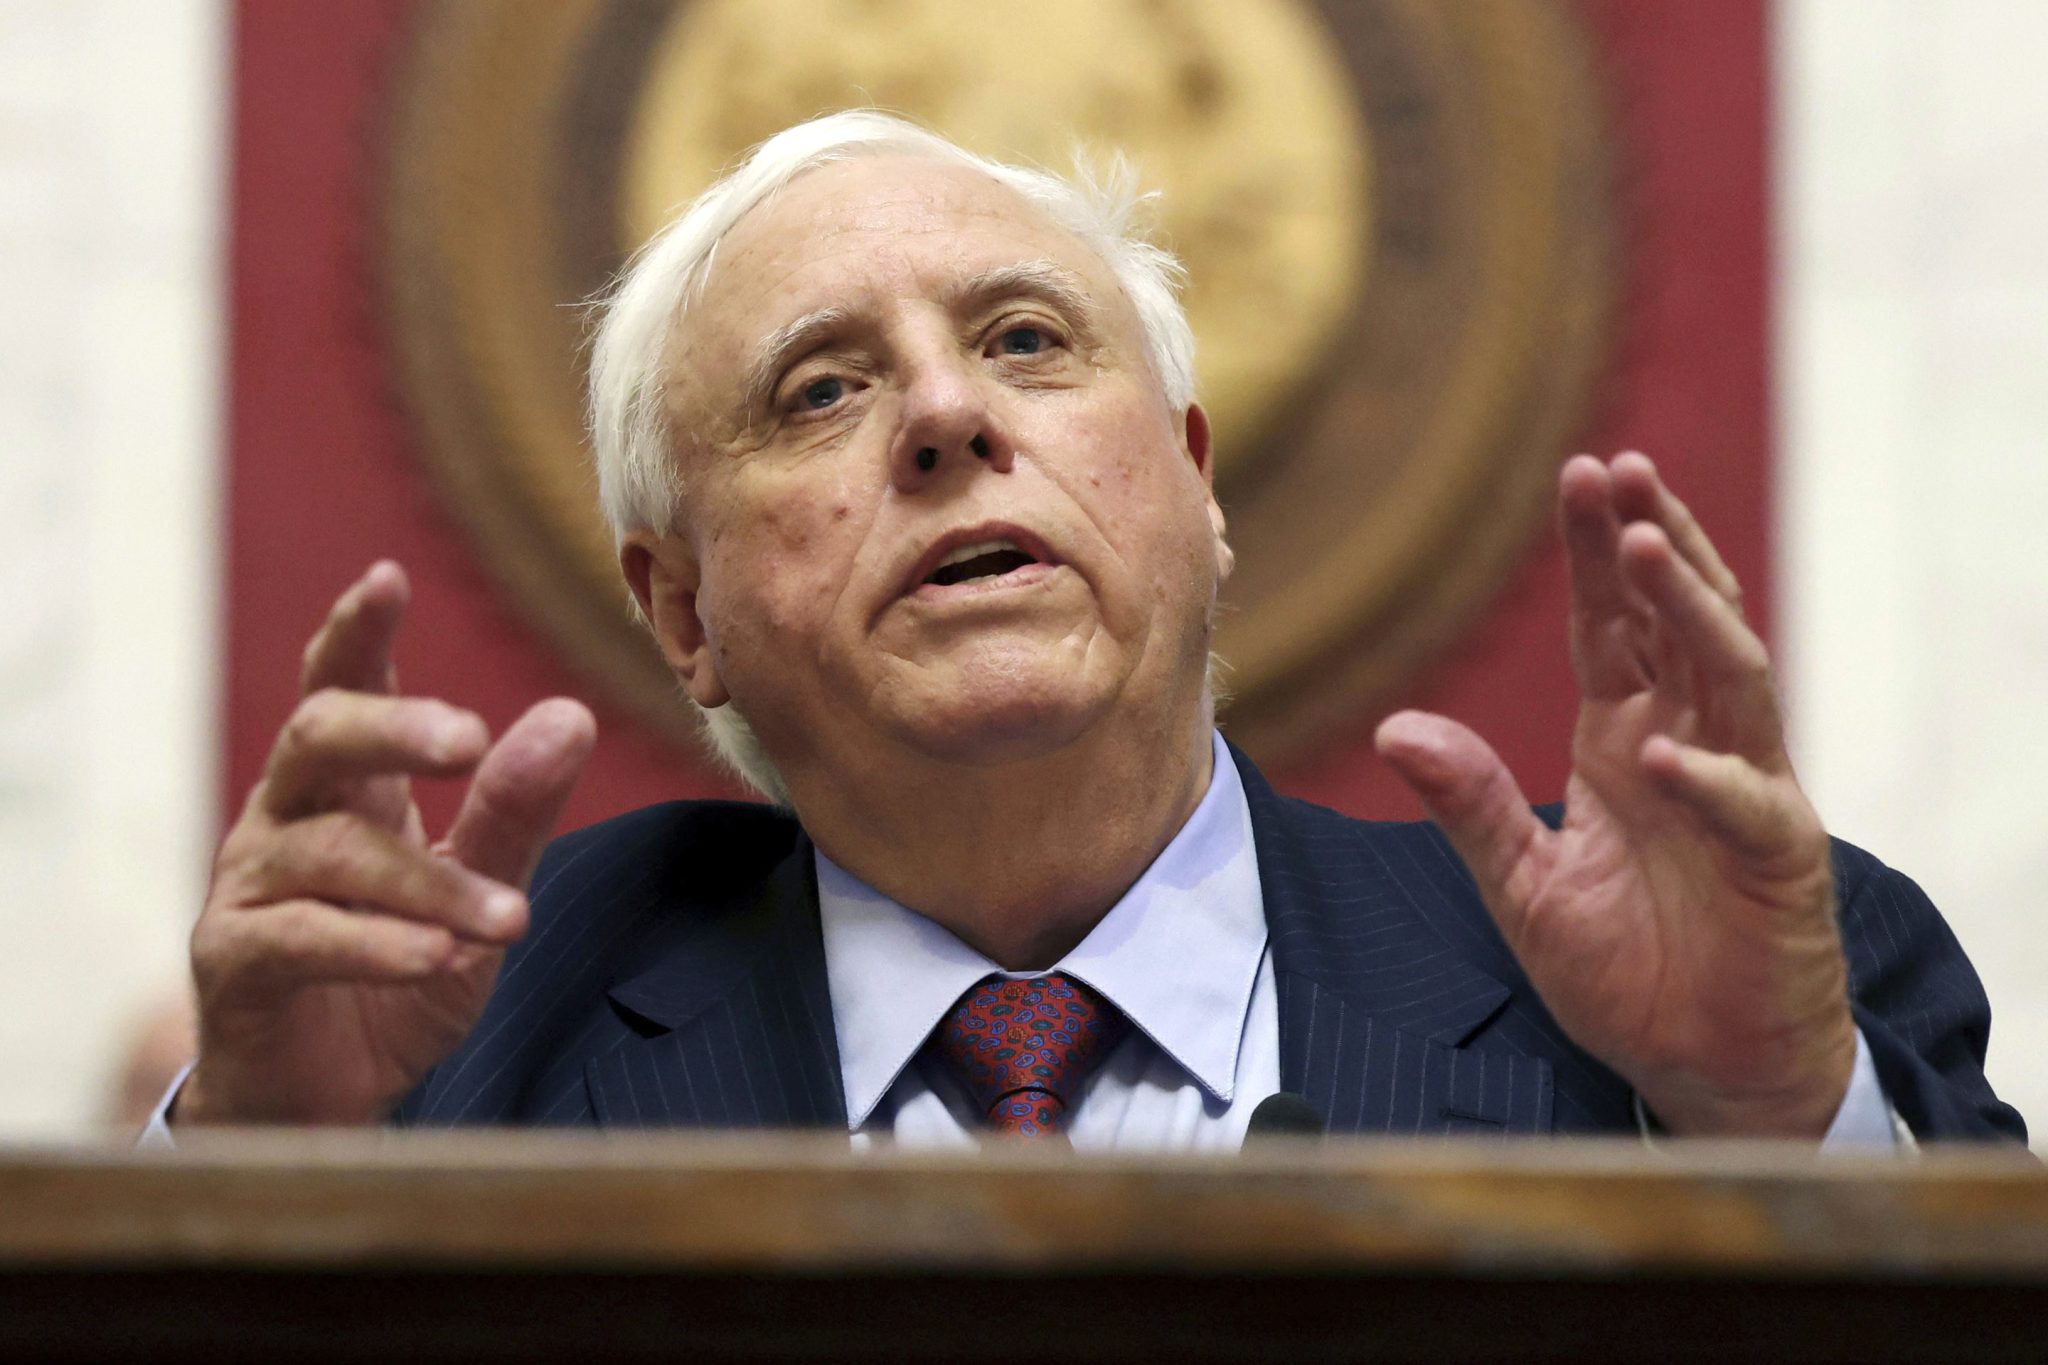 West Virginia Gov. Jim Justice fights bank seeking to auction off his resort property